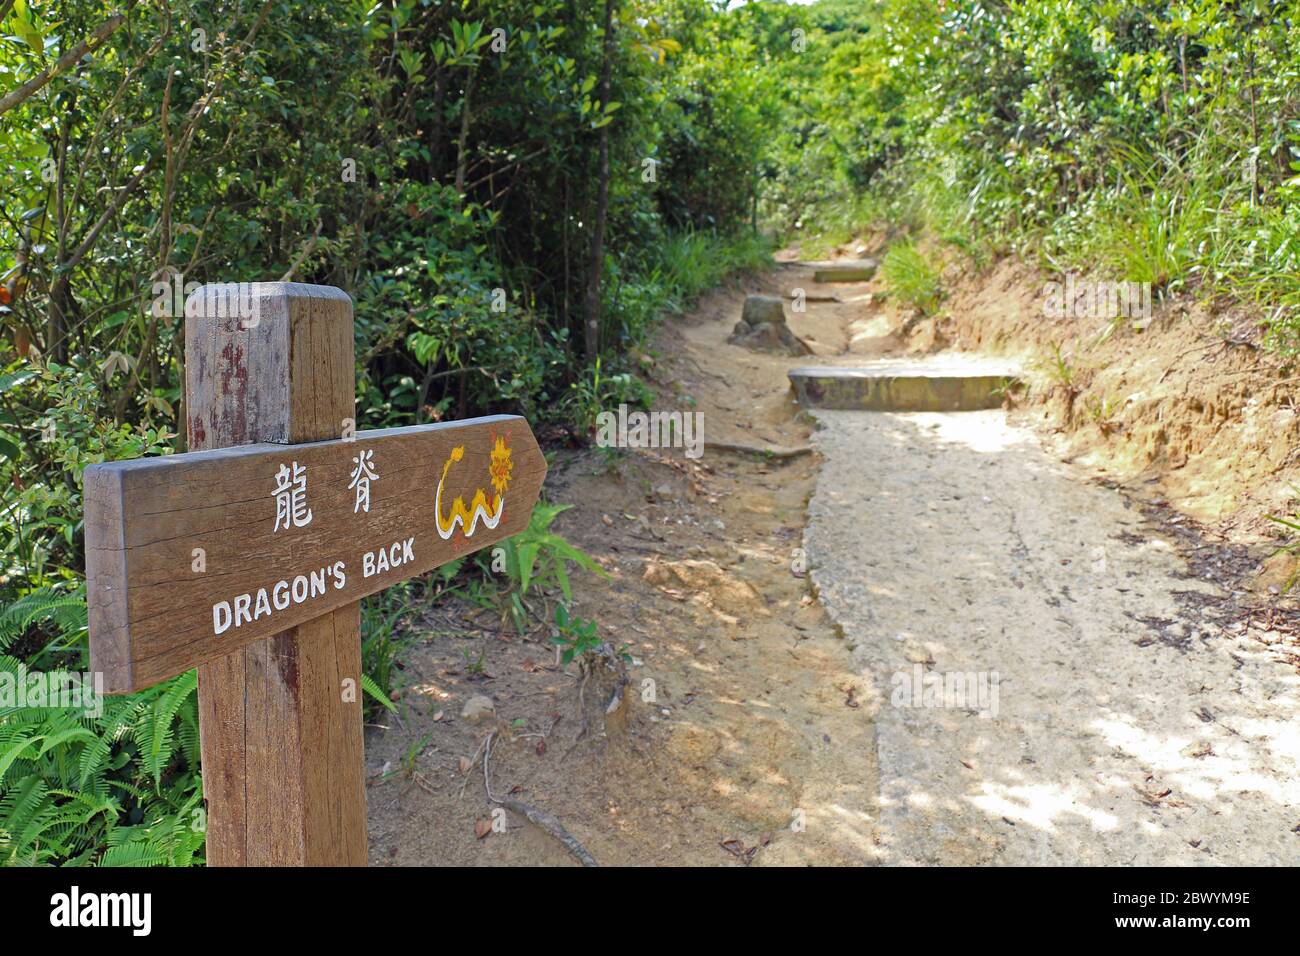 A wooden sign showing the route of the dragon's back hike in Hong Kong. Stock Photo